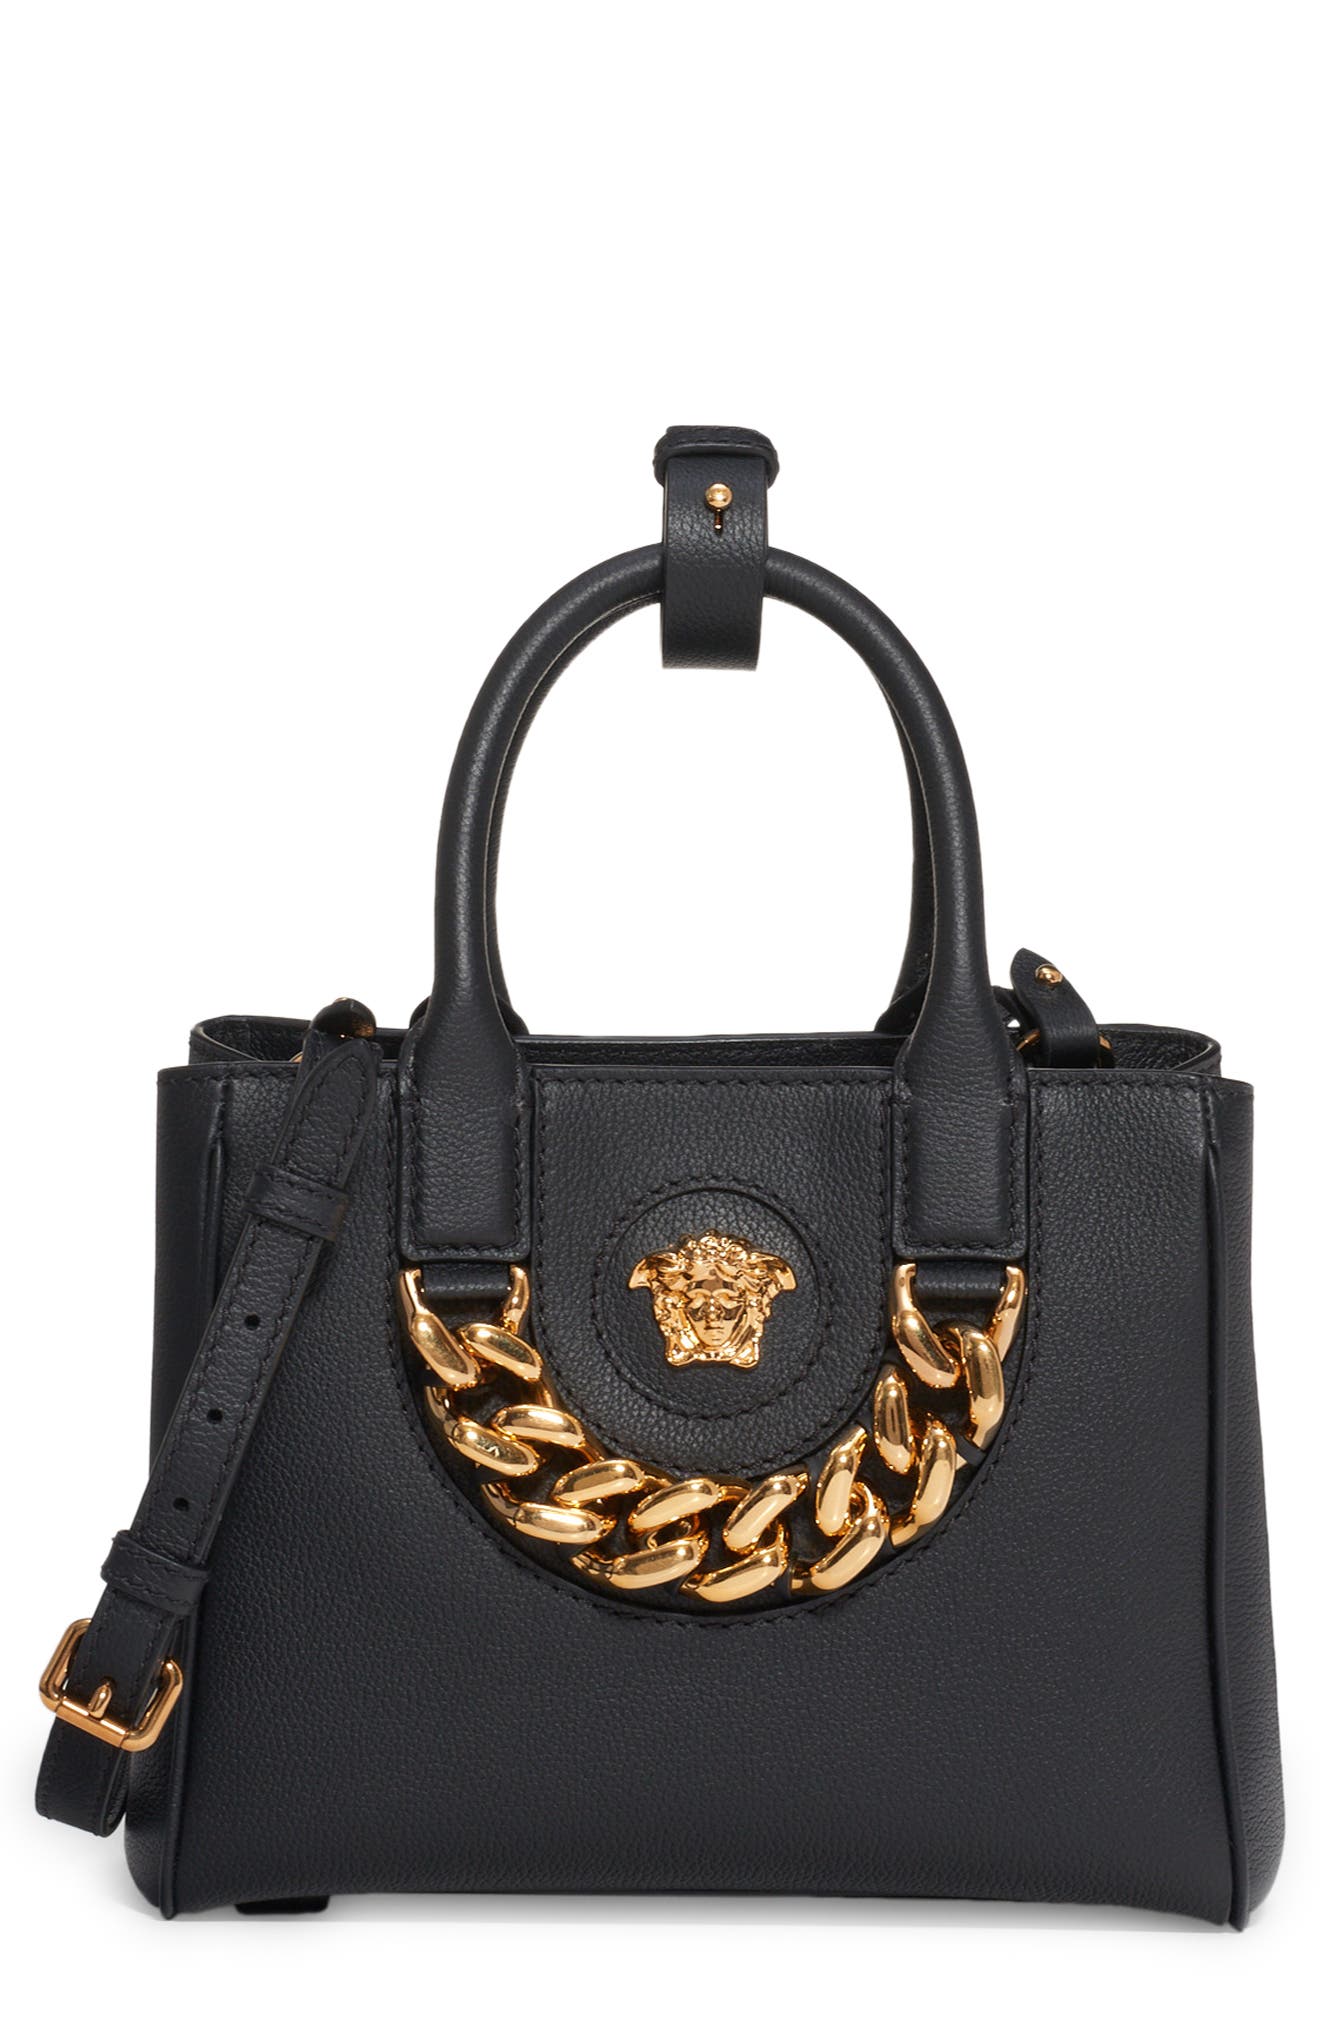 Versace Small Leather Tote Bag in Black